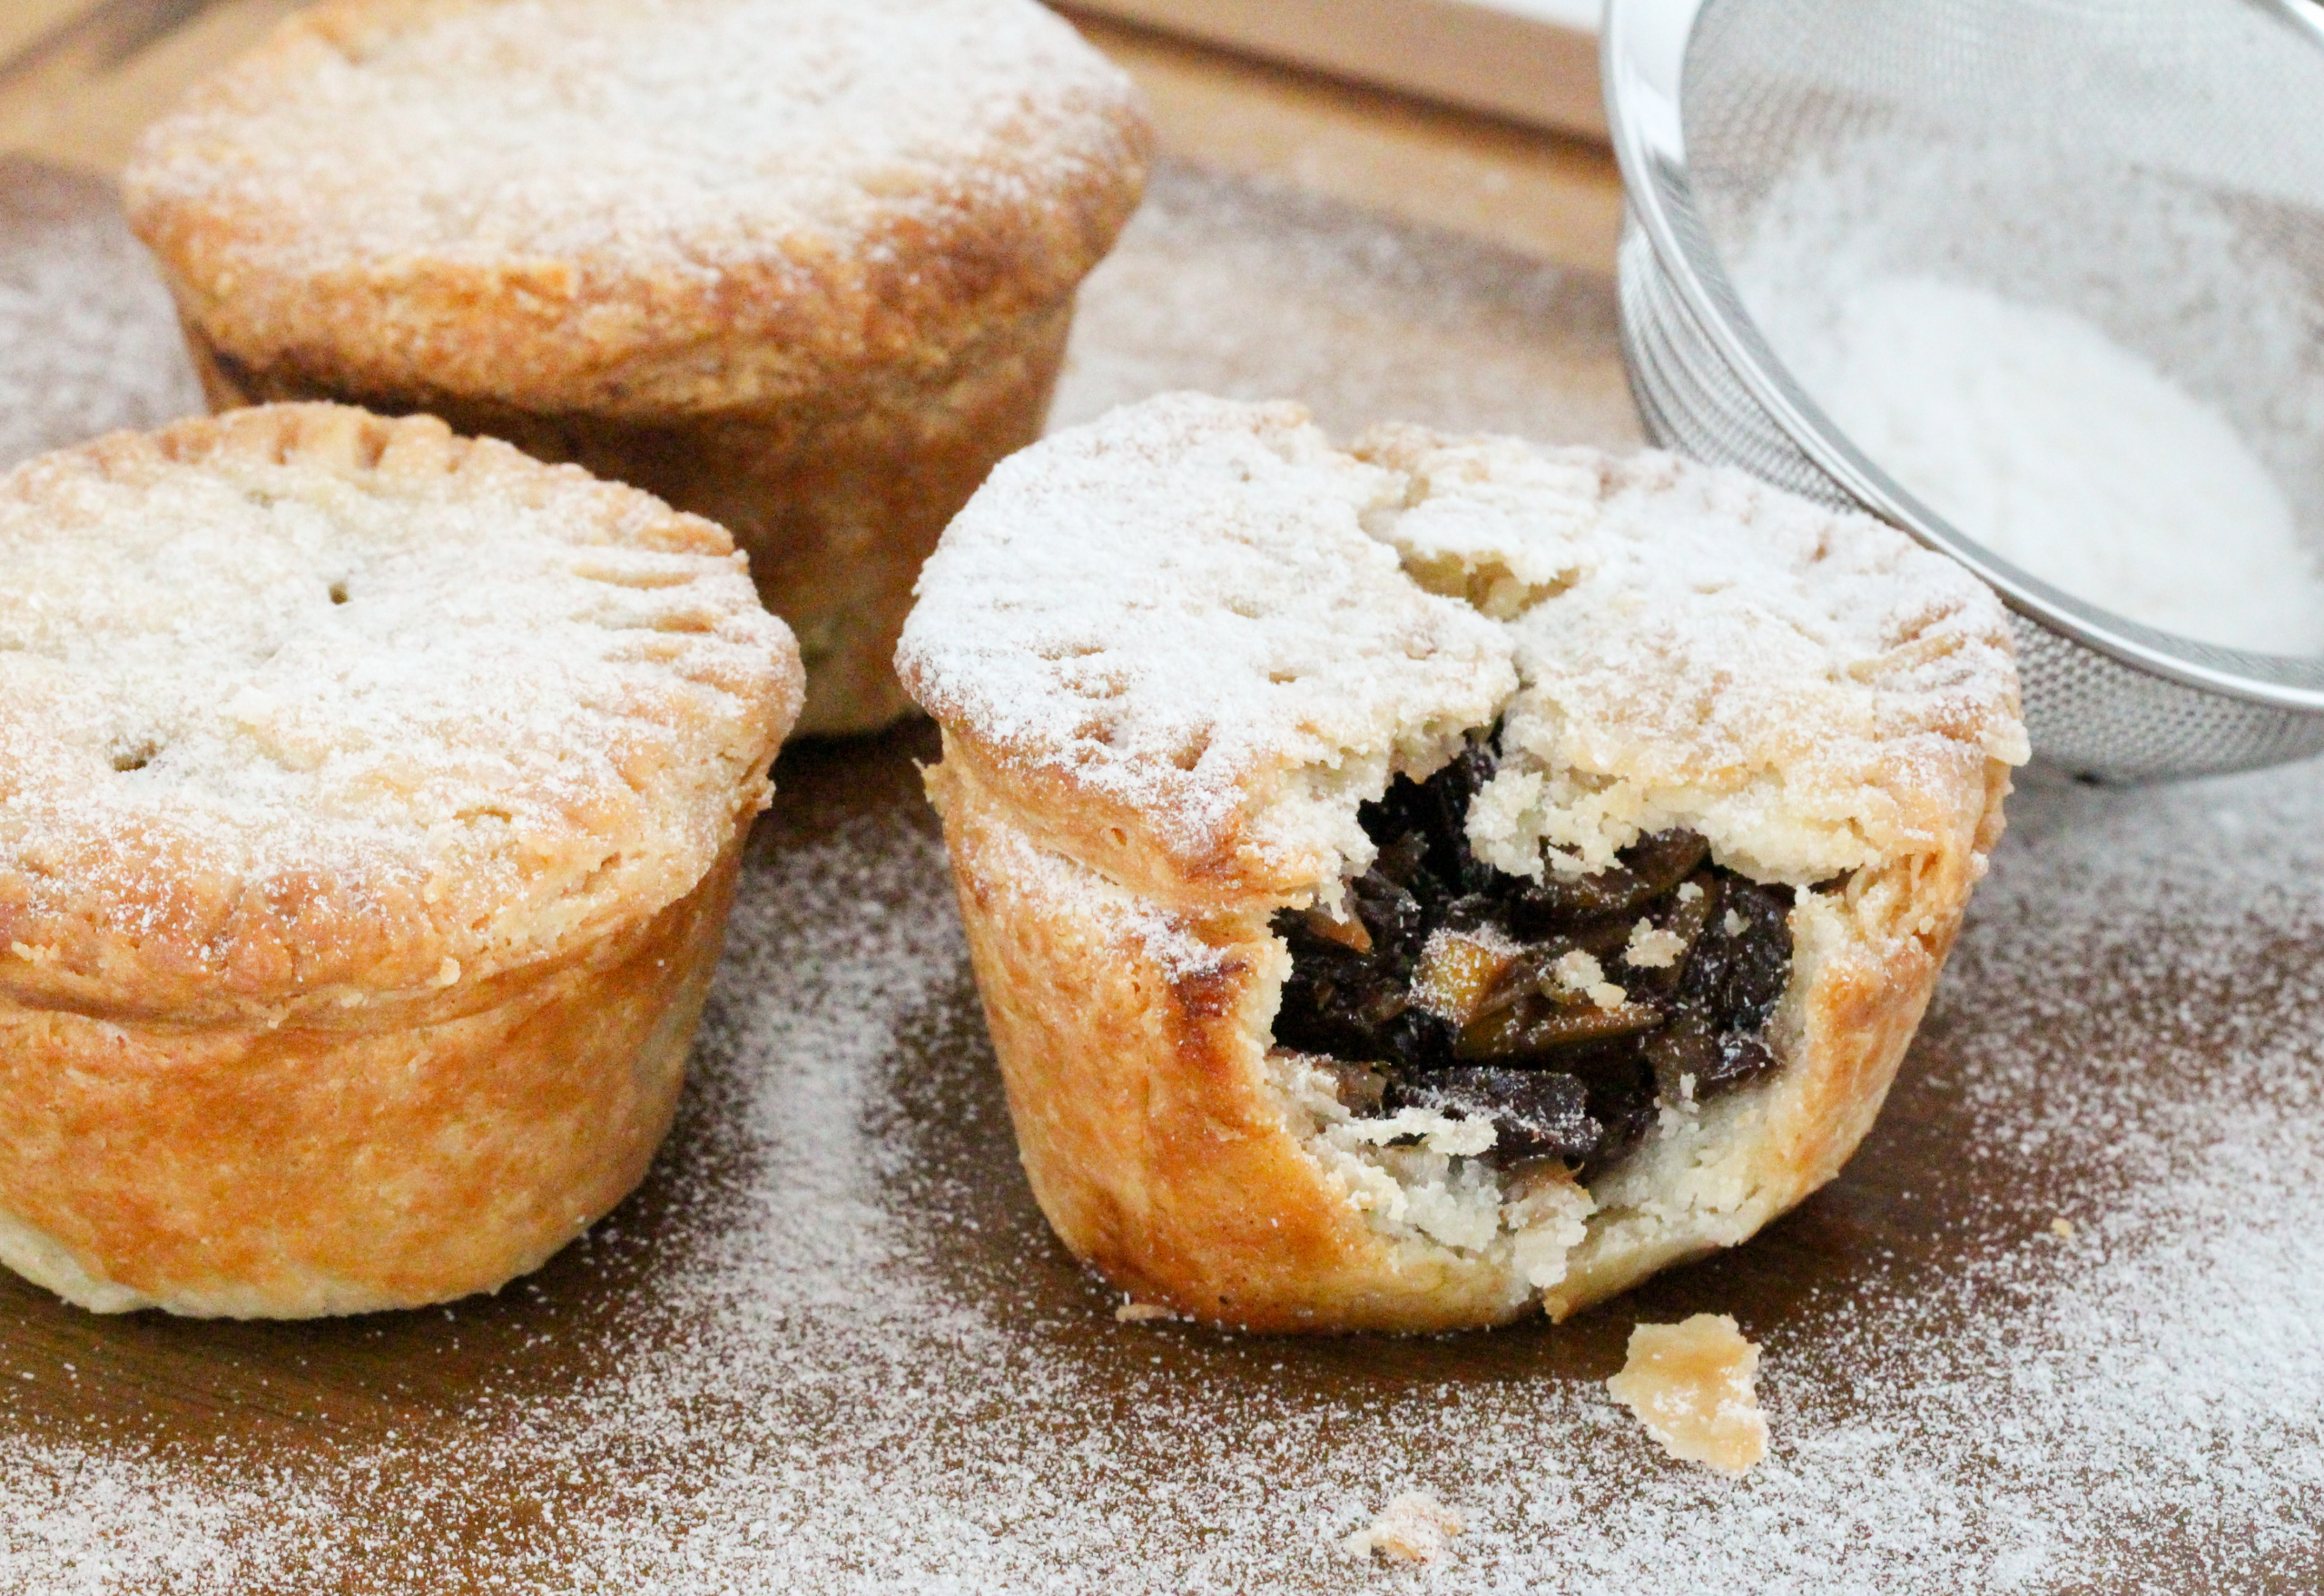 A mixture of dried fruits, sugar, spices, and brandy, Christmas Mince Pie is a traditional British holiday dessert. Recipe shared with permission granted by H.Y. Hanna, author of THE MOUSSE WONDERFUL TIME OF THE YEAR. 